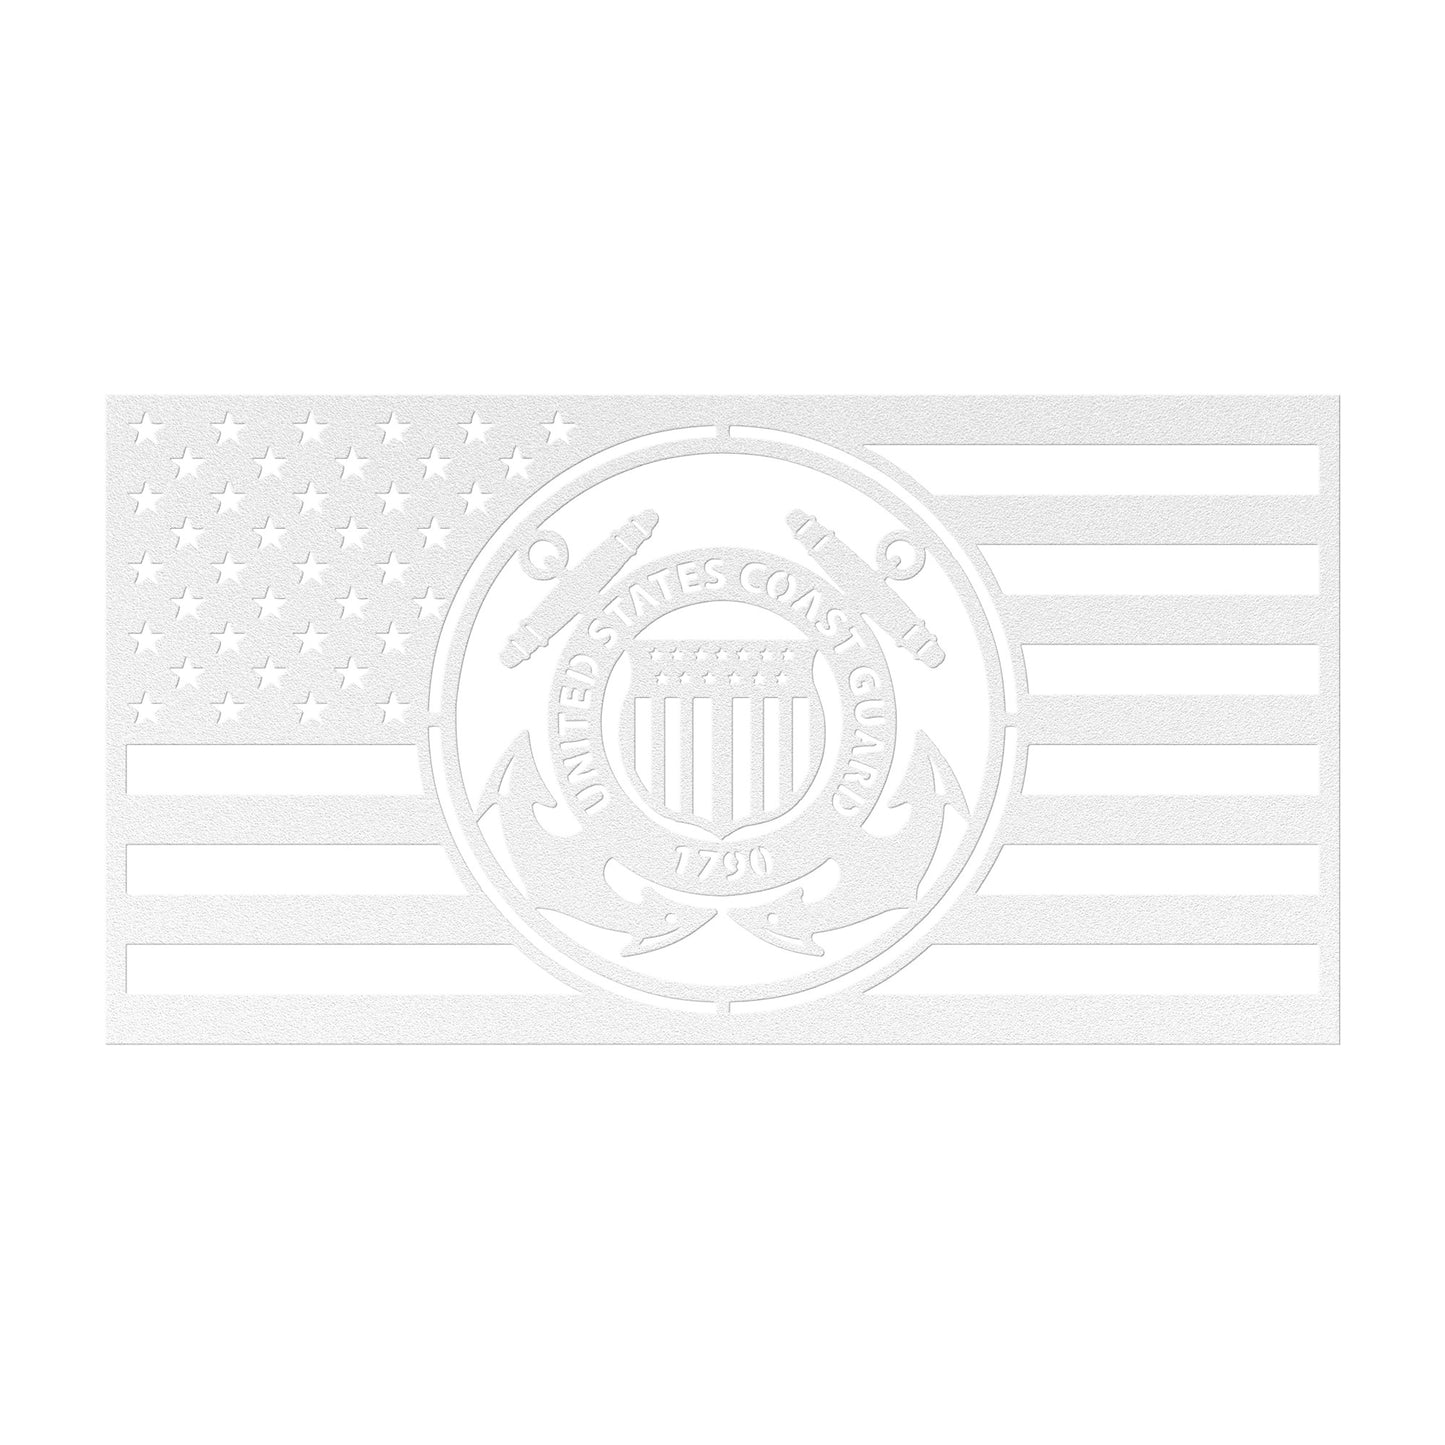 United States Coast Guard Themed American Flag - Made in USA - Military Decor